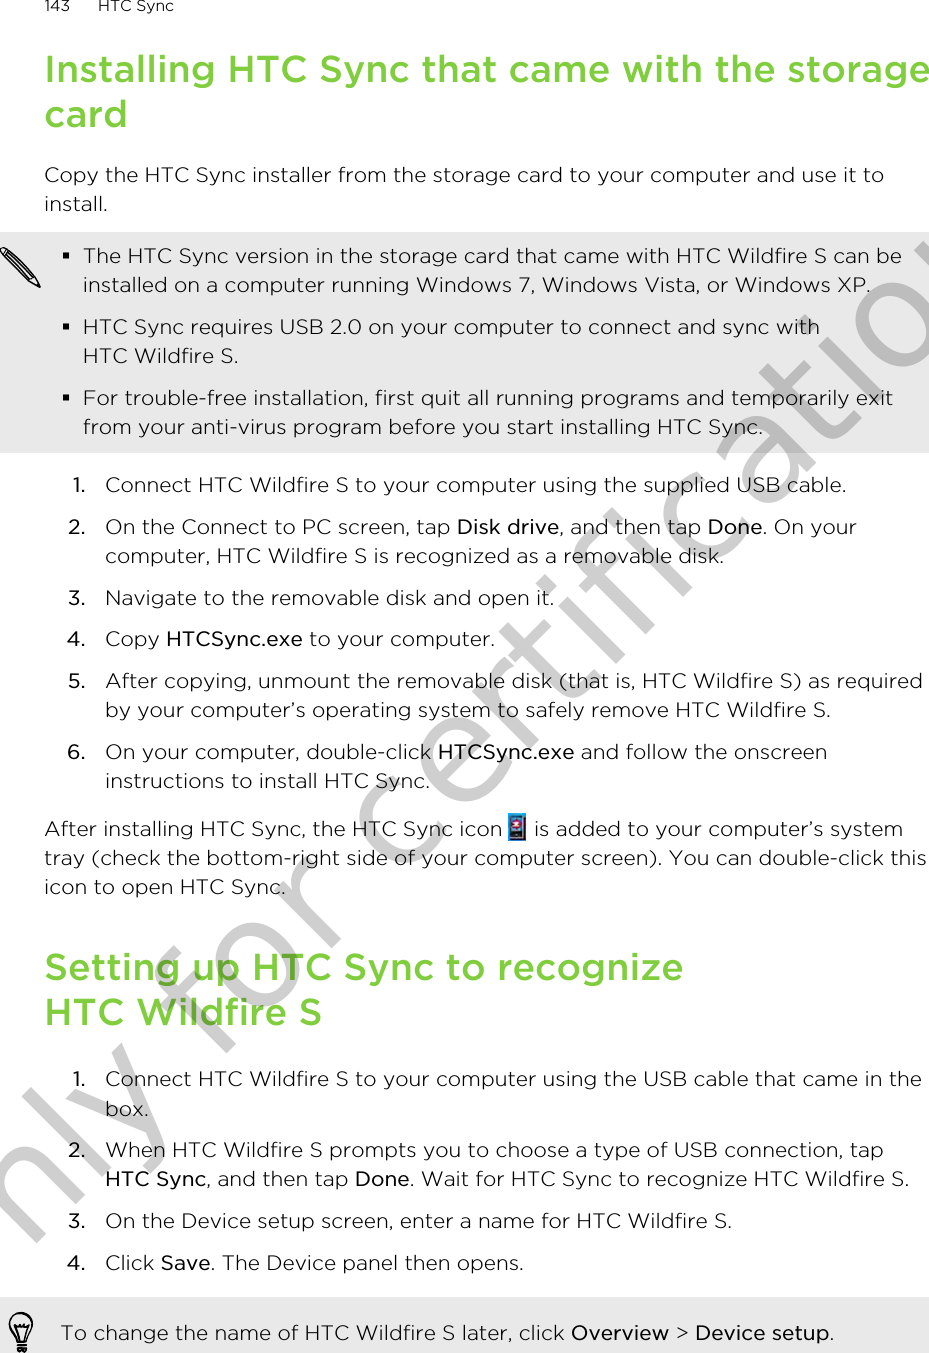 Installing HTC Sync that came with the storagecardCopy the HTC Sync installer from the storage card to your computer and use it toinstall.§The HTC Sync version in the storage card that came with HTC Wildfire S can beinstalled on a computer running Windows 7, Windows Vista, or Windows XP.§HTC Sync requires USB 2.0 on your computer to connect and sync withHTC Wildfire S.§For trouble-free installation, first quit all running programs and temporarily exitfrom your anti-virus program before you start installing HTC Sync.1. Connect HTC Wildfire S to your computer using the supplied USB cable.2. On the Connect to PC screen, tap Disk drive, and then tap Done. On yourcomputer, HTC Wildfire S is recognized as a removable disk.3. Navigate to the removable disk and open it.4. Copy HTCSync.exe to your computer.5. After copying, unmount the removable disk (that is, HTC Wildfire S) as requiredby your computer’s operating system to safely remove HTC Wildfire S.6. On your computer, double-click HTCSync.exe and follow the onscreeninstructions to install HTC Sync.After installing HTC Sync, the HTC Sync icon   is added to your computer’s systemtray (check the bottom-right side of your computer screen). You can double-click thisicon to open HTC Sync.Setting up HTC Sync to recognizeHTC Wildfire S1. Connect HTC Wildfire S to your computer using the USB cable that came in thebox.2. When HTC Wildfire S prompts you to choose a type of USB connection, tapHTC Sync, and then tap Done. Wait for HTC Sync to recognize HTC Wildfire S.3. On the Device setup screen, enter a name for HTC Wildfire S.4. Click Save. The Device panel then opens.To change the name of HTC Wildfire S later, click Overview &gt; Device setup.143 HTC SyncOnly for certification